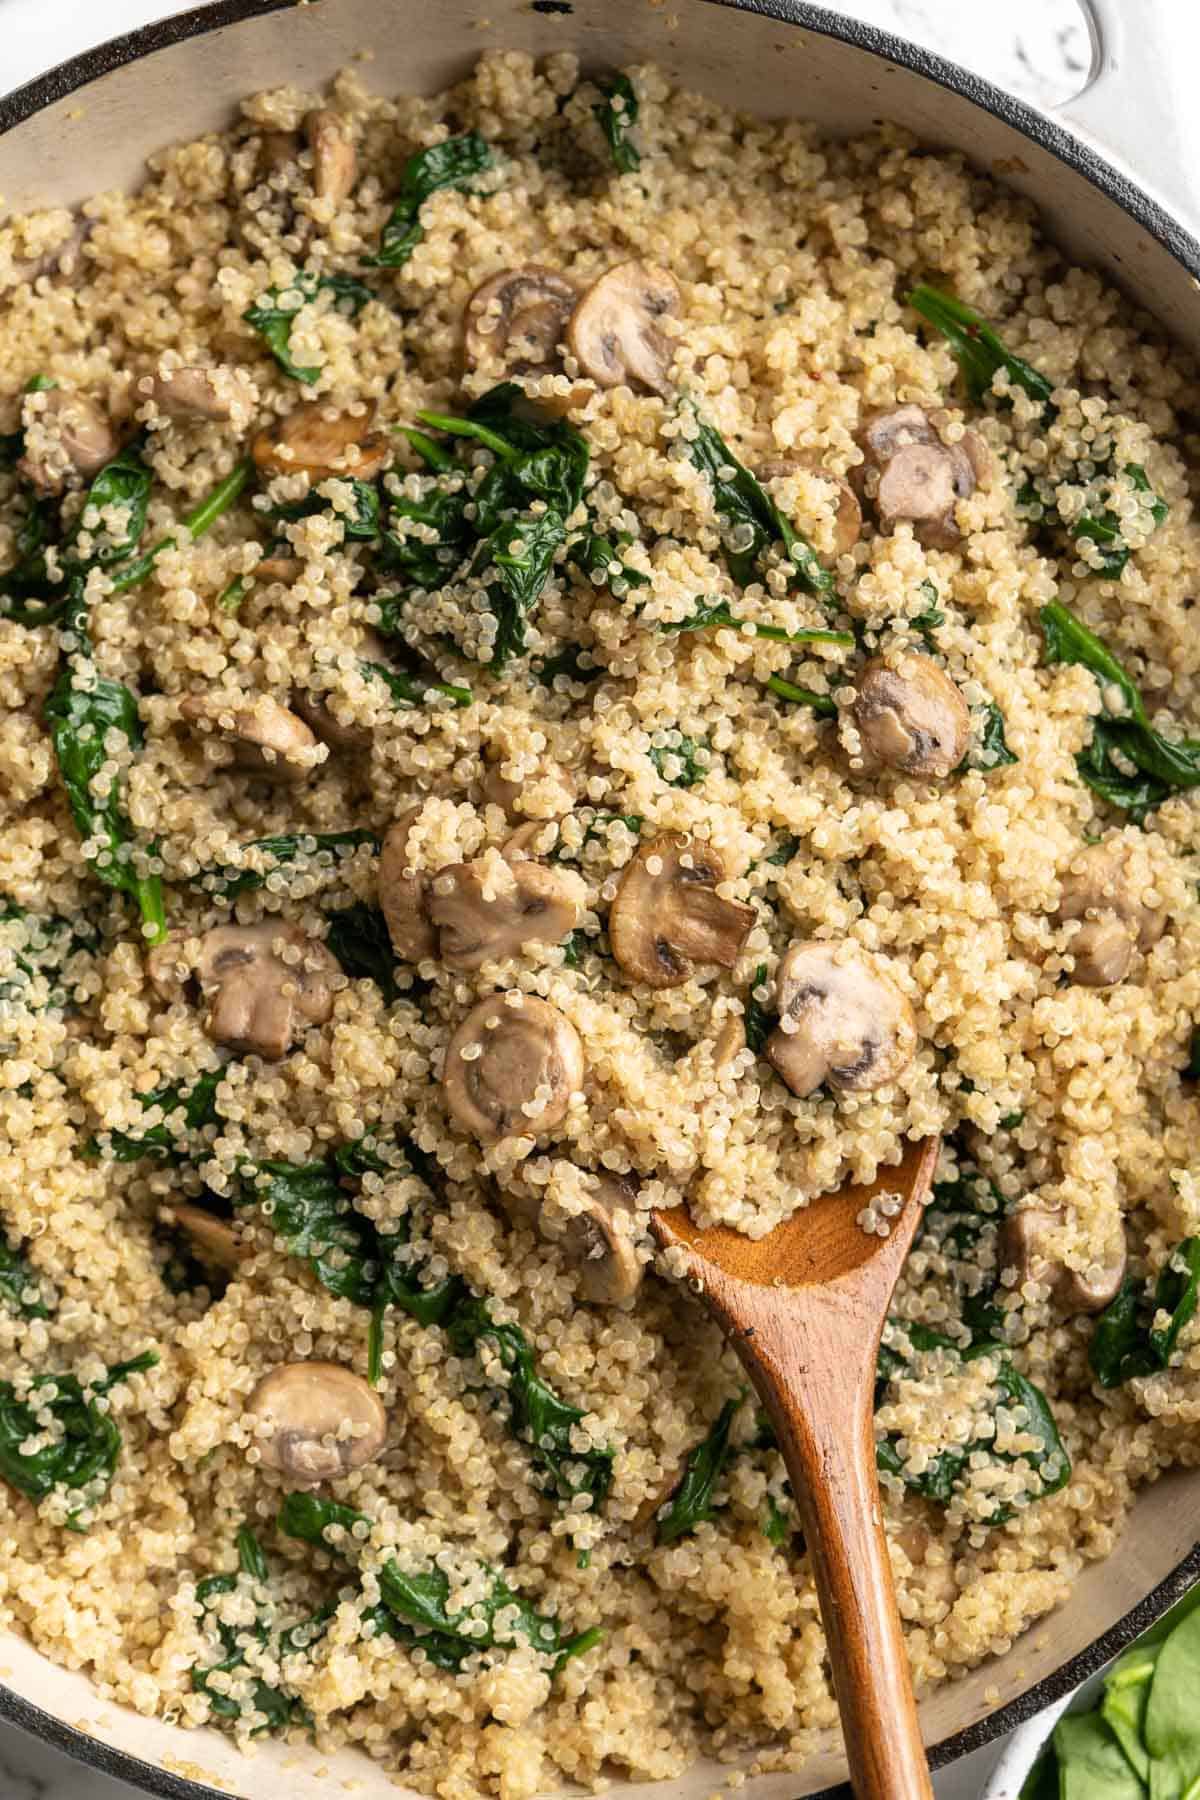 Overhead view of coconut creamy spinach and mushroom quinoa in skillet